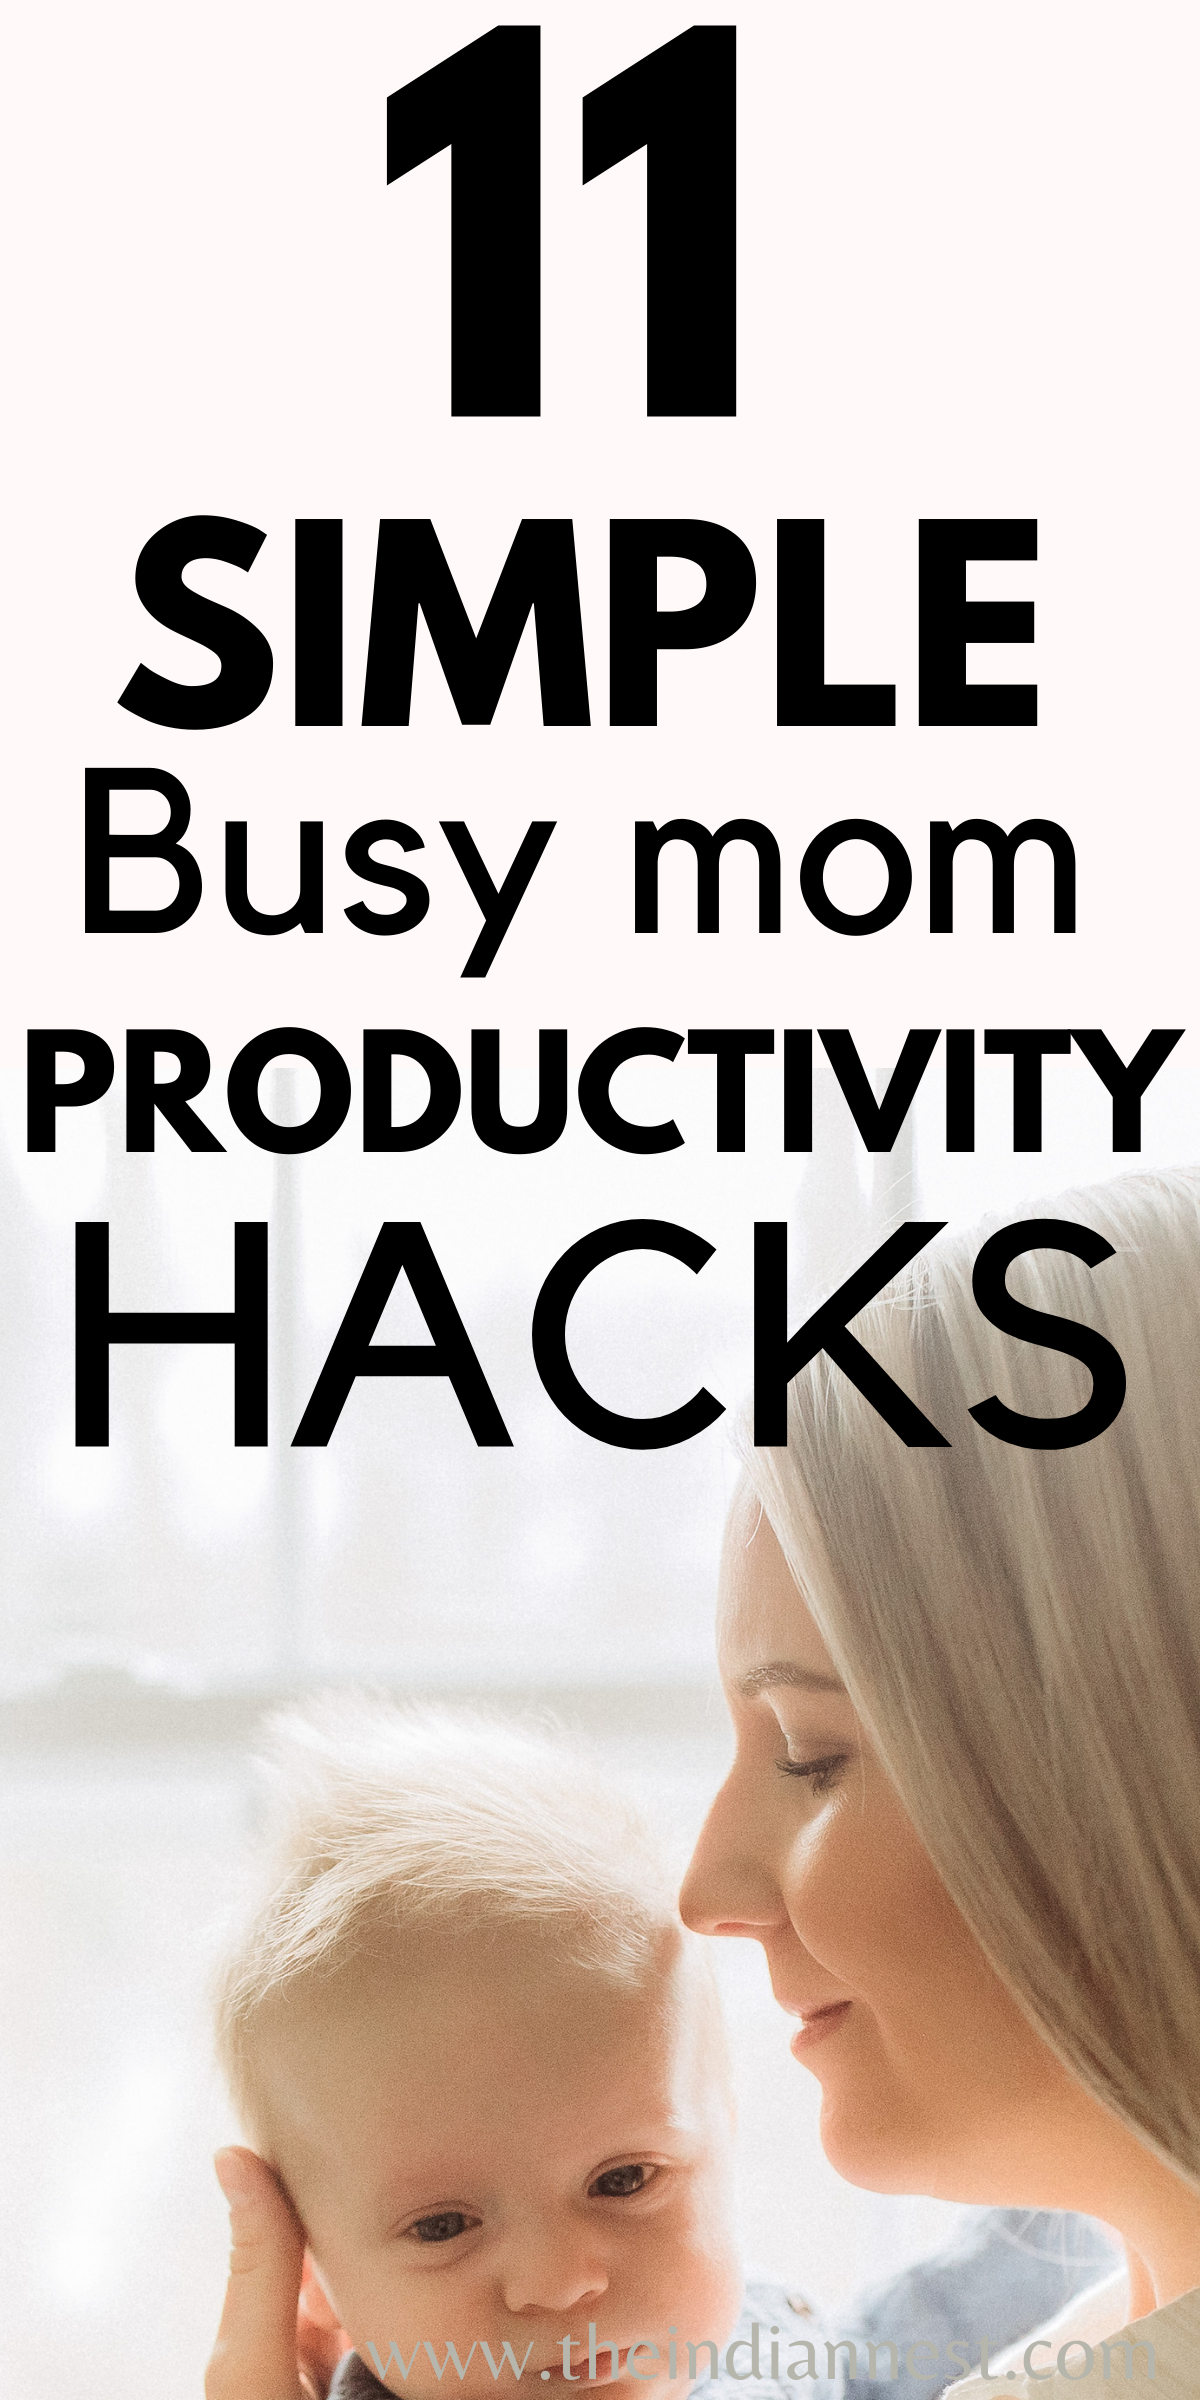 How to Skyrocket Productivity as a Mom and Love your Life? I do have some tips that I use to refresh myself to be happier and more productive at home. Habits of Smart Working Mothers. Tips to being a happy and productive stay-at-home mom.